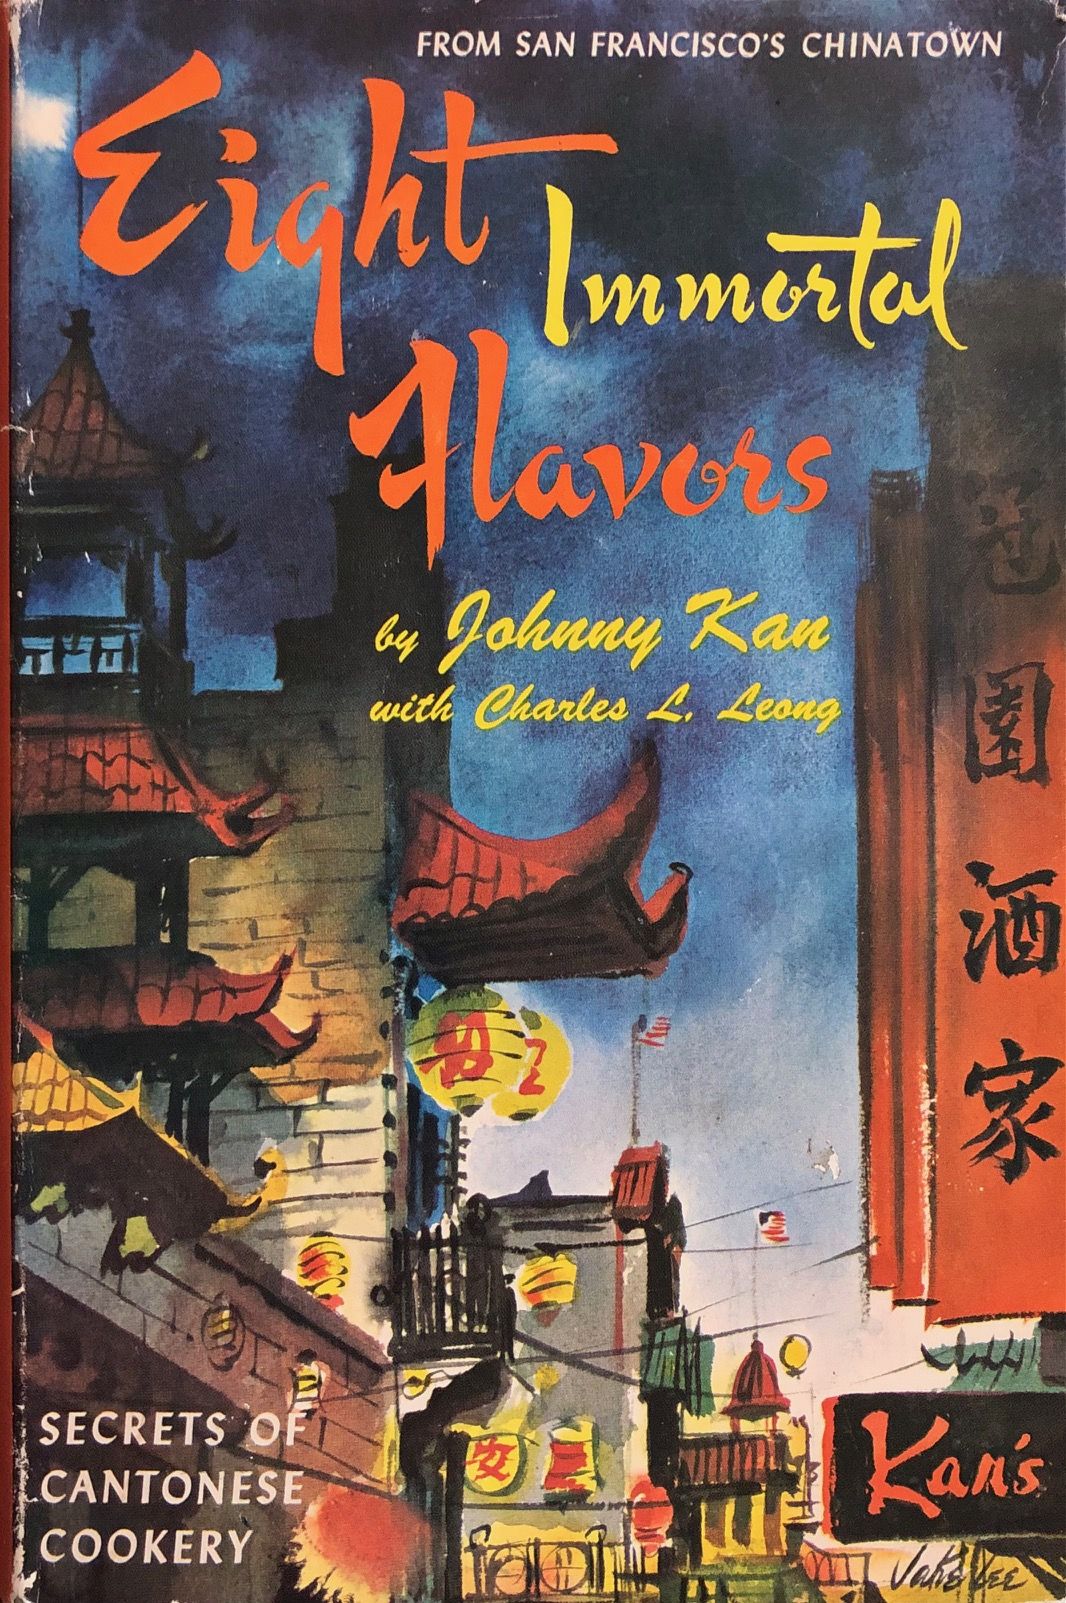 (*NEW ARRIVAL*) (Chinese - San Francisco) Kan, Johnny & Charles Leong.  Eight Immortal Flavors from San Francisco’s Chinatown. *Signed*